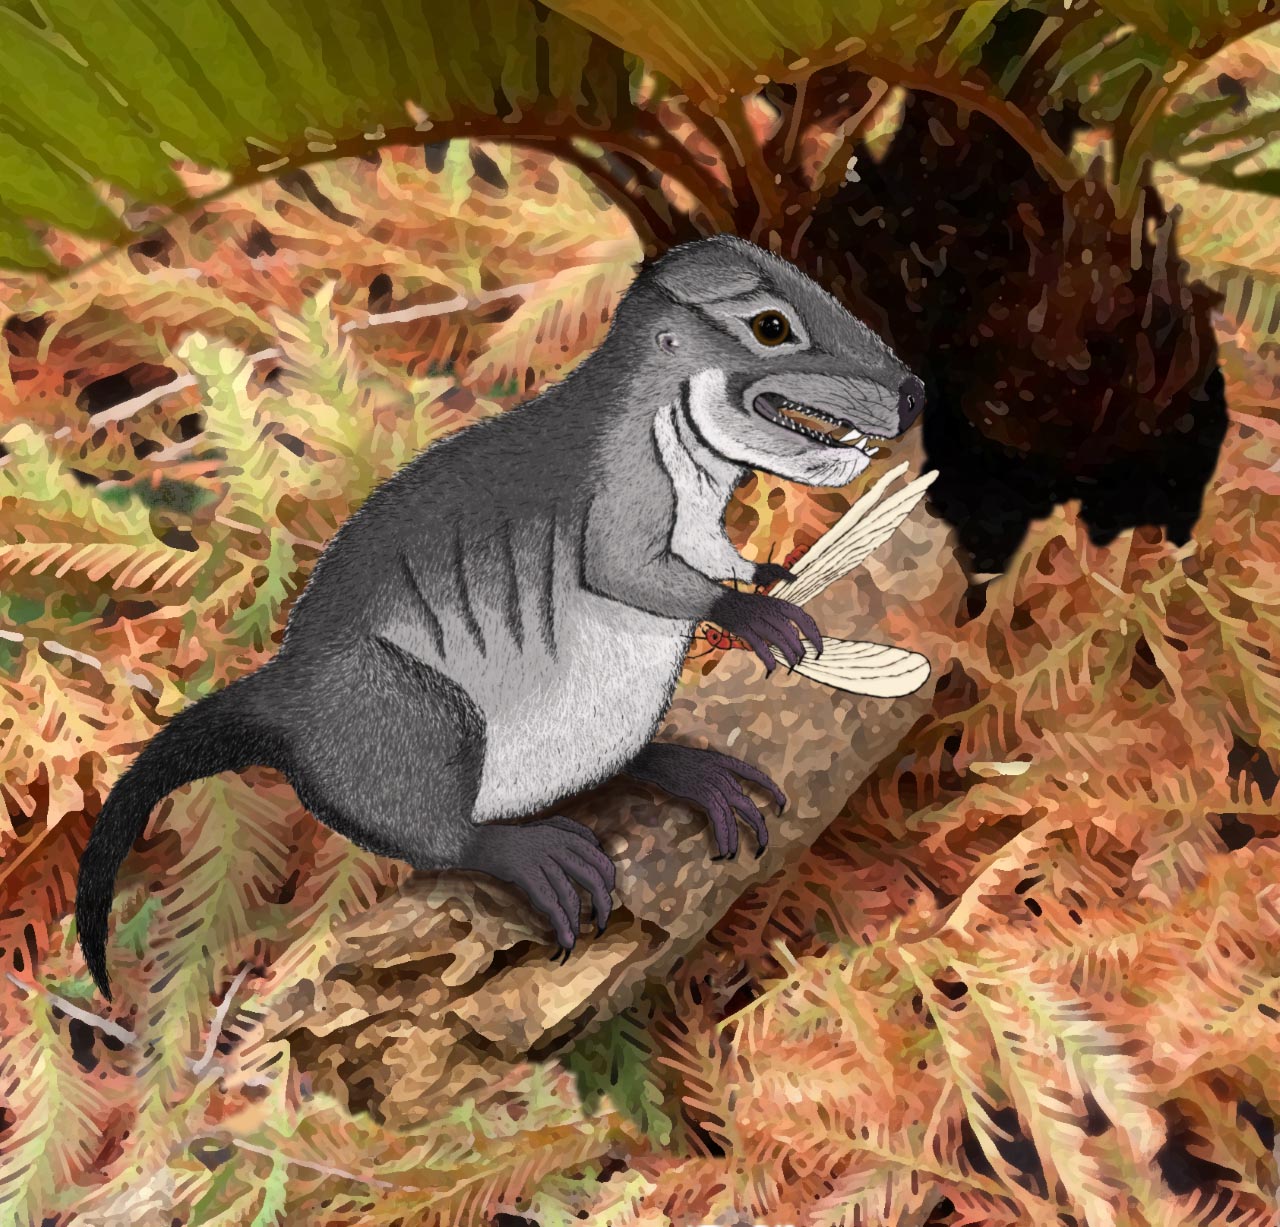 In a bed of fern leaves, a small, gray and white squirrel-like mammal relative prepares to eat a dragonfly.